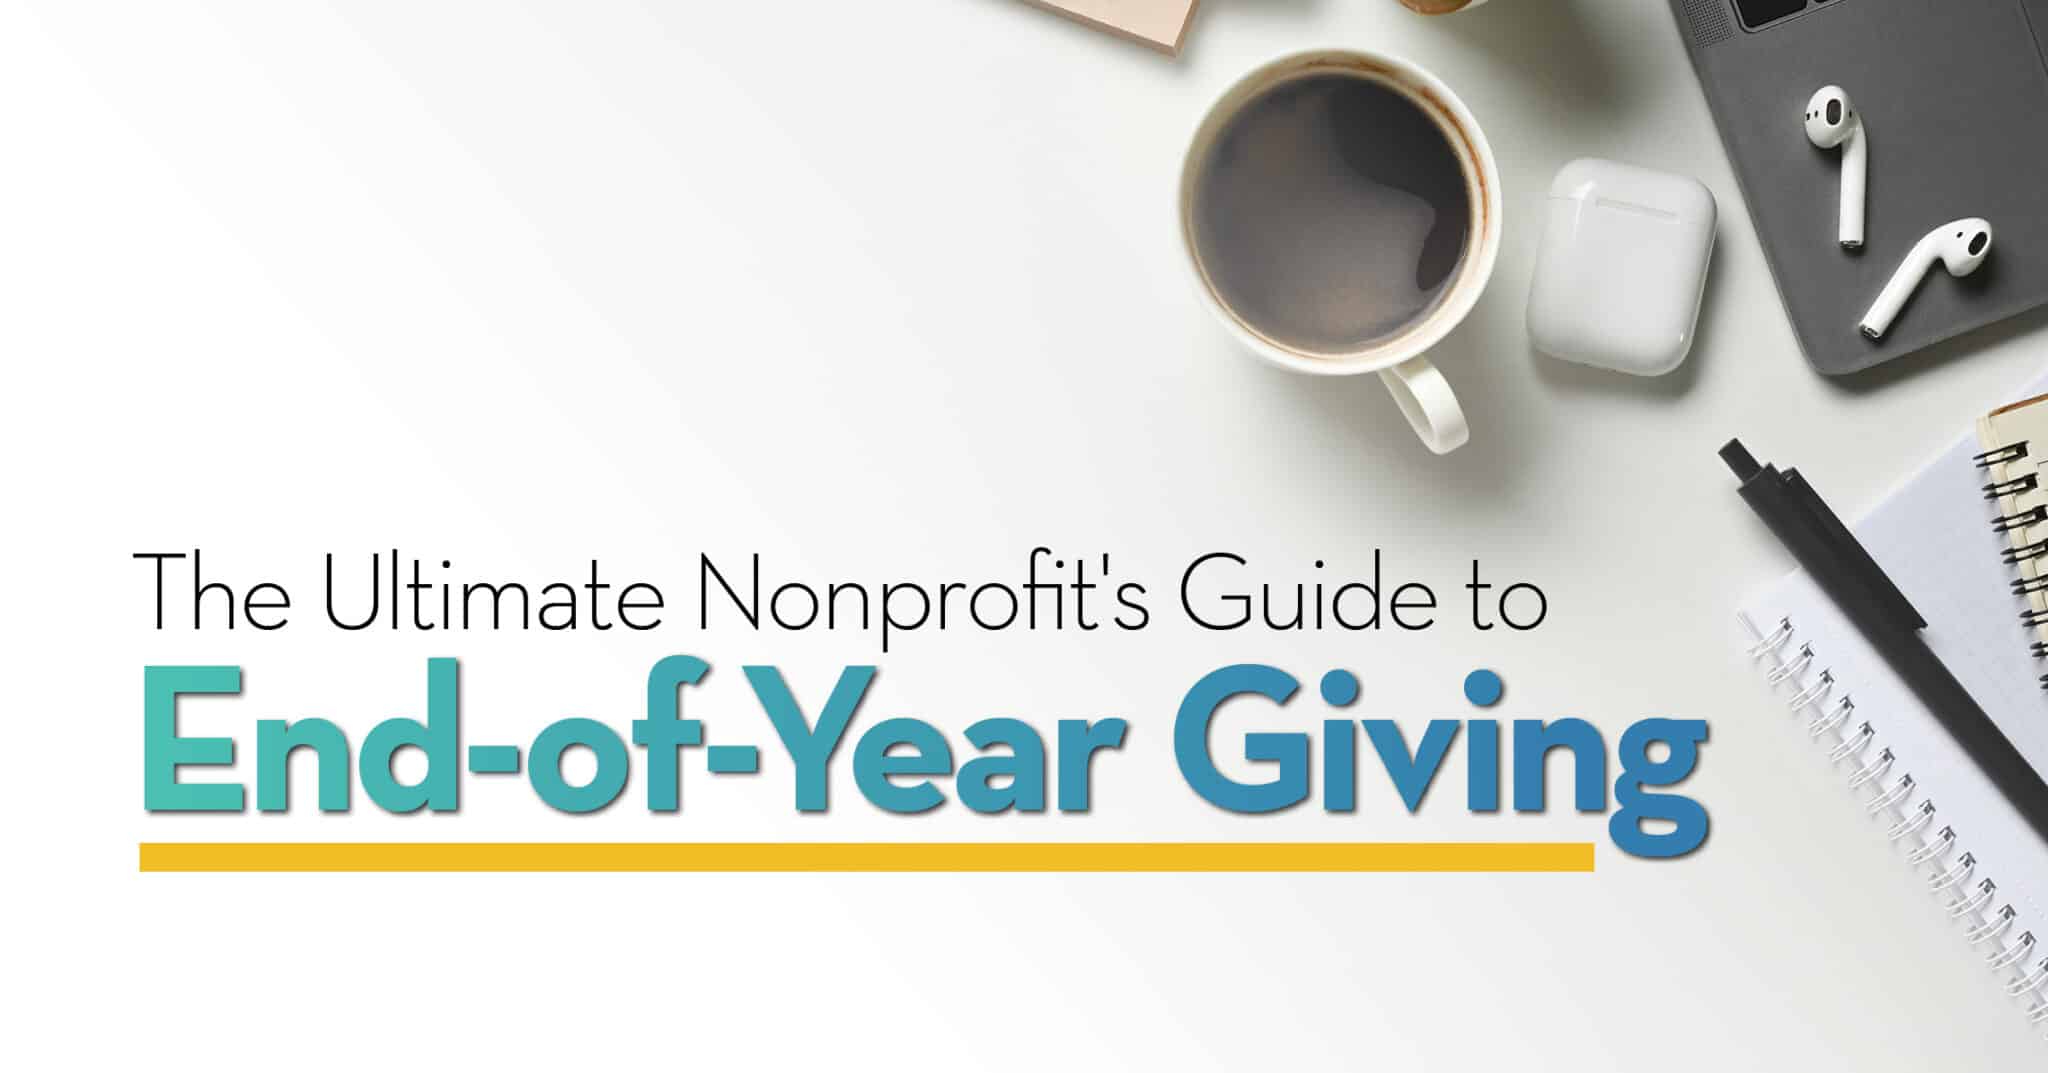 The Ultimate Nonprofit's Guide to End-of-Year Giving